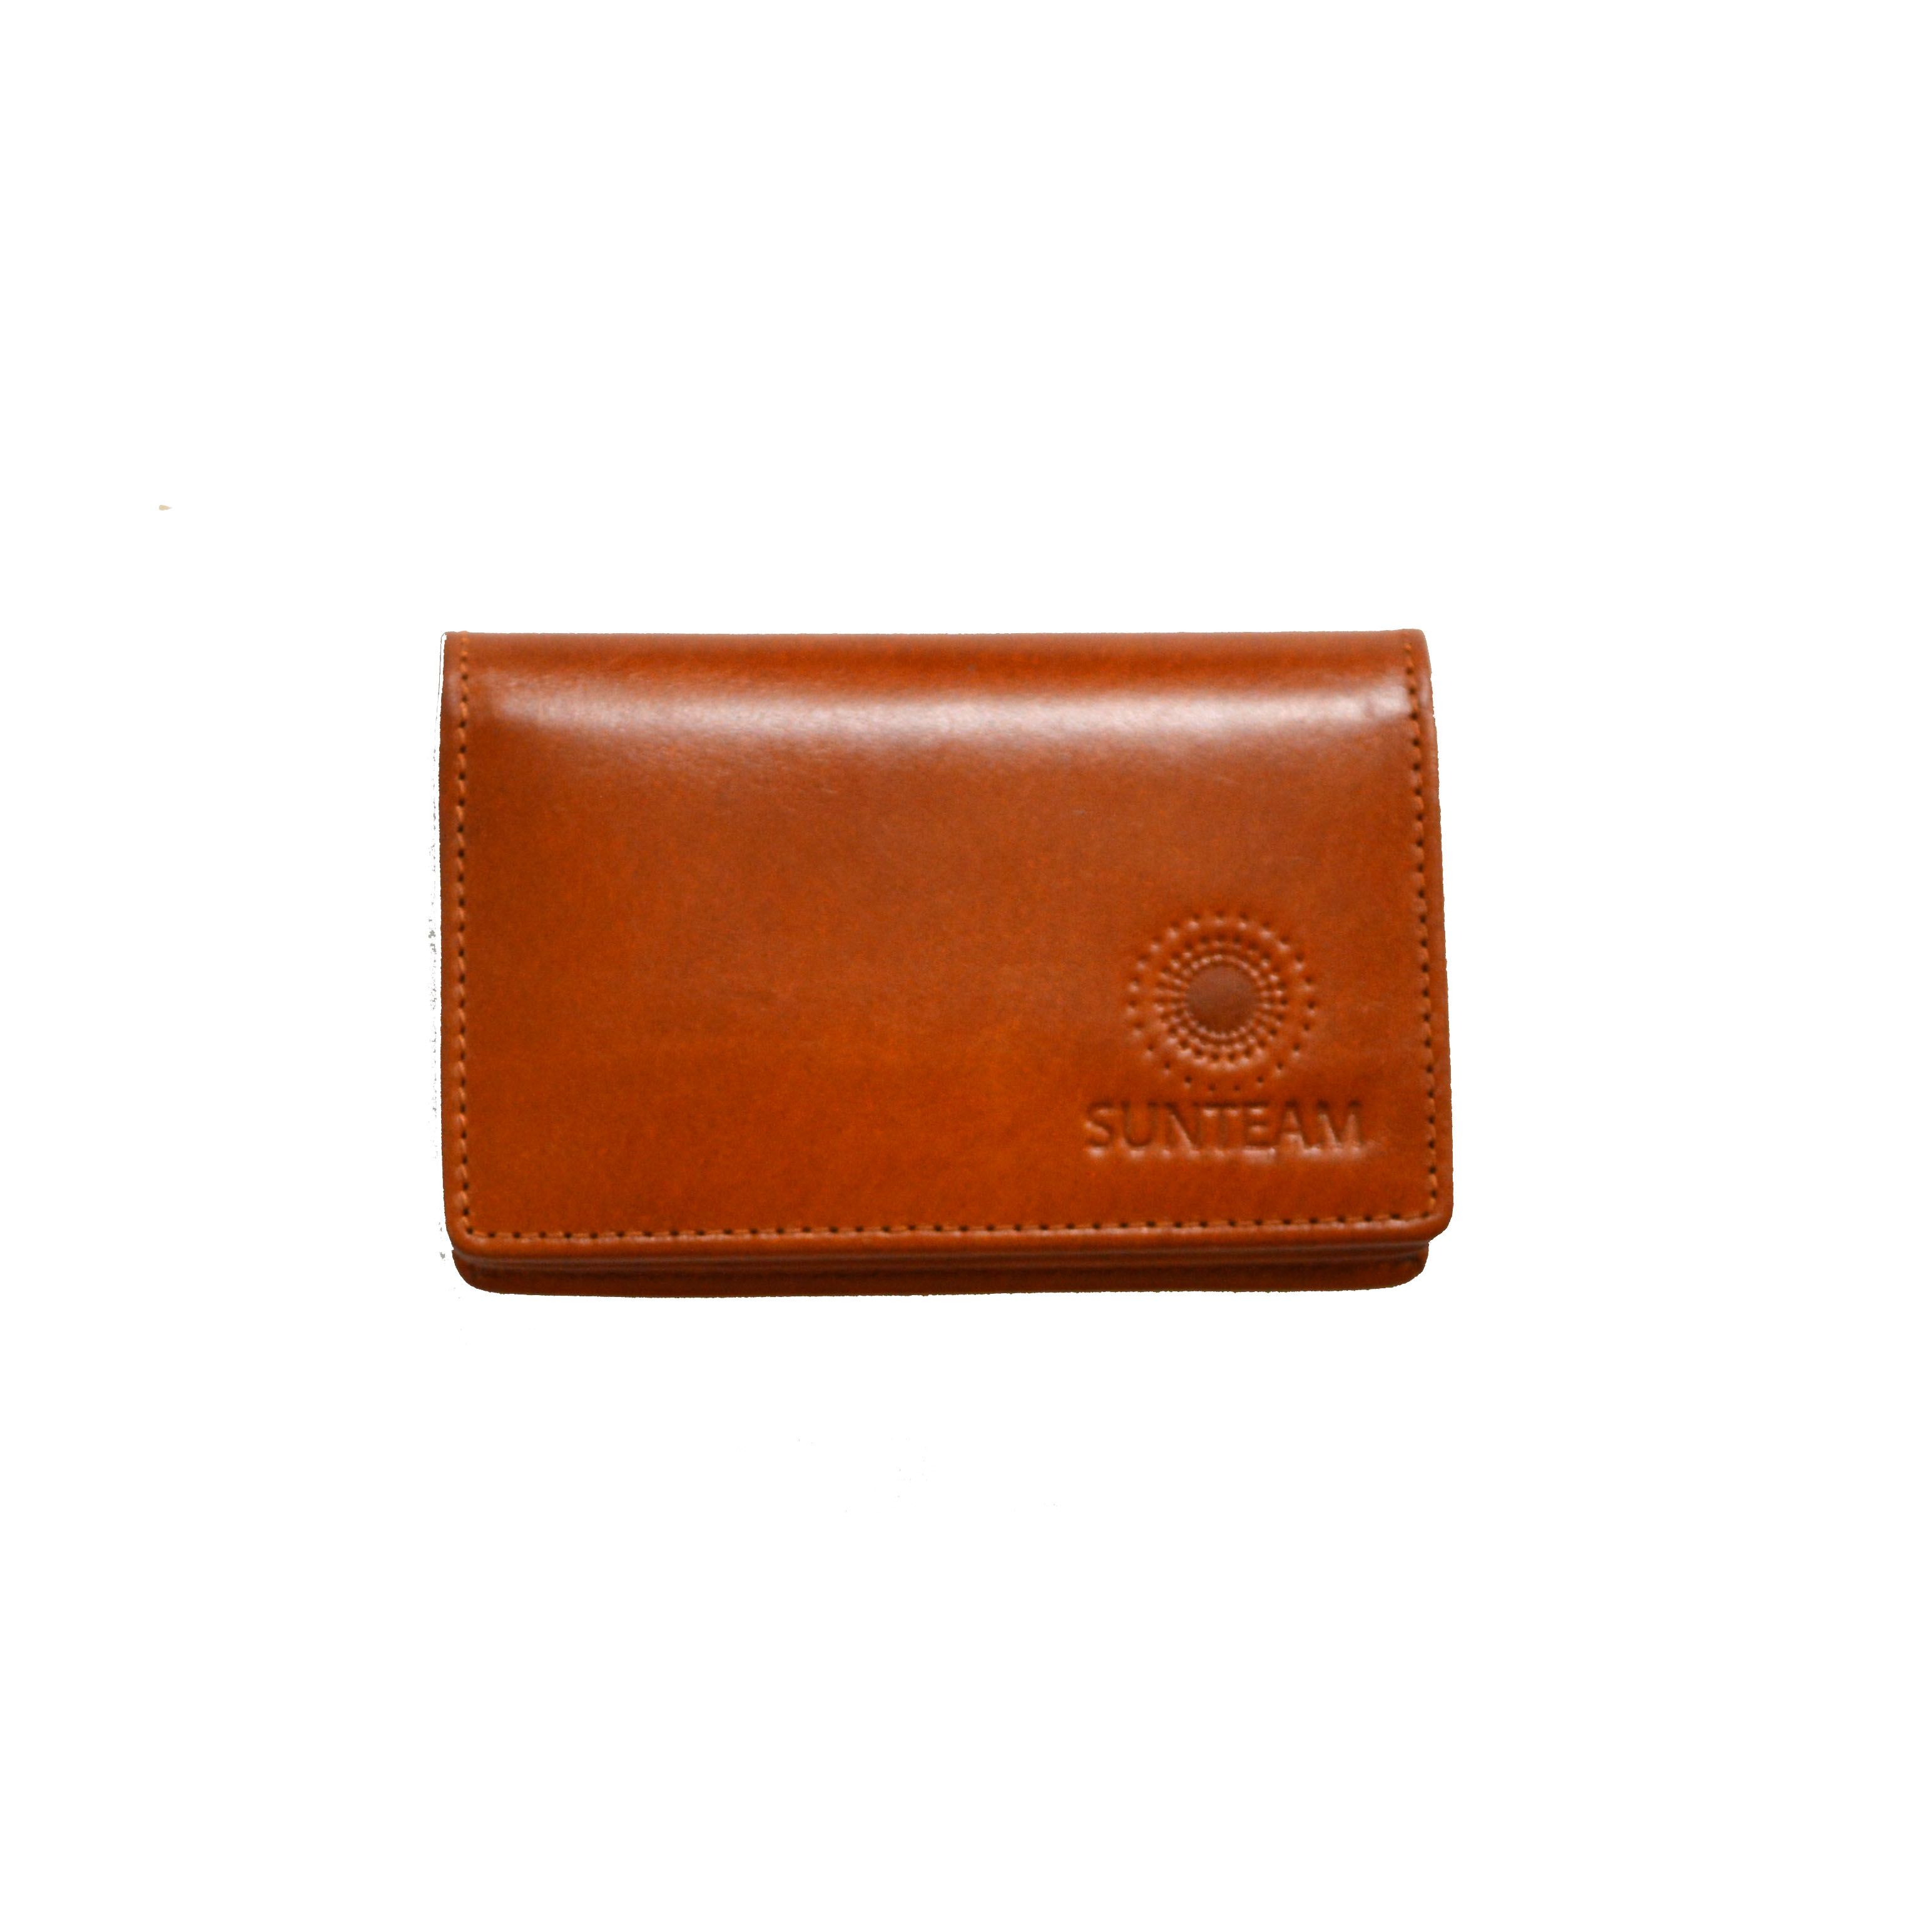 High quality geunine leather wallet，genuine leather woman wallet china，latest styles fashion card hoders